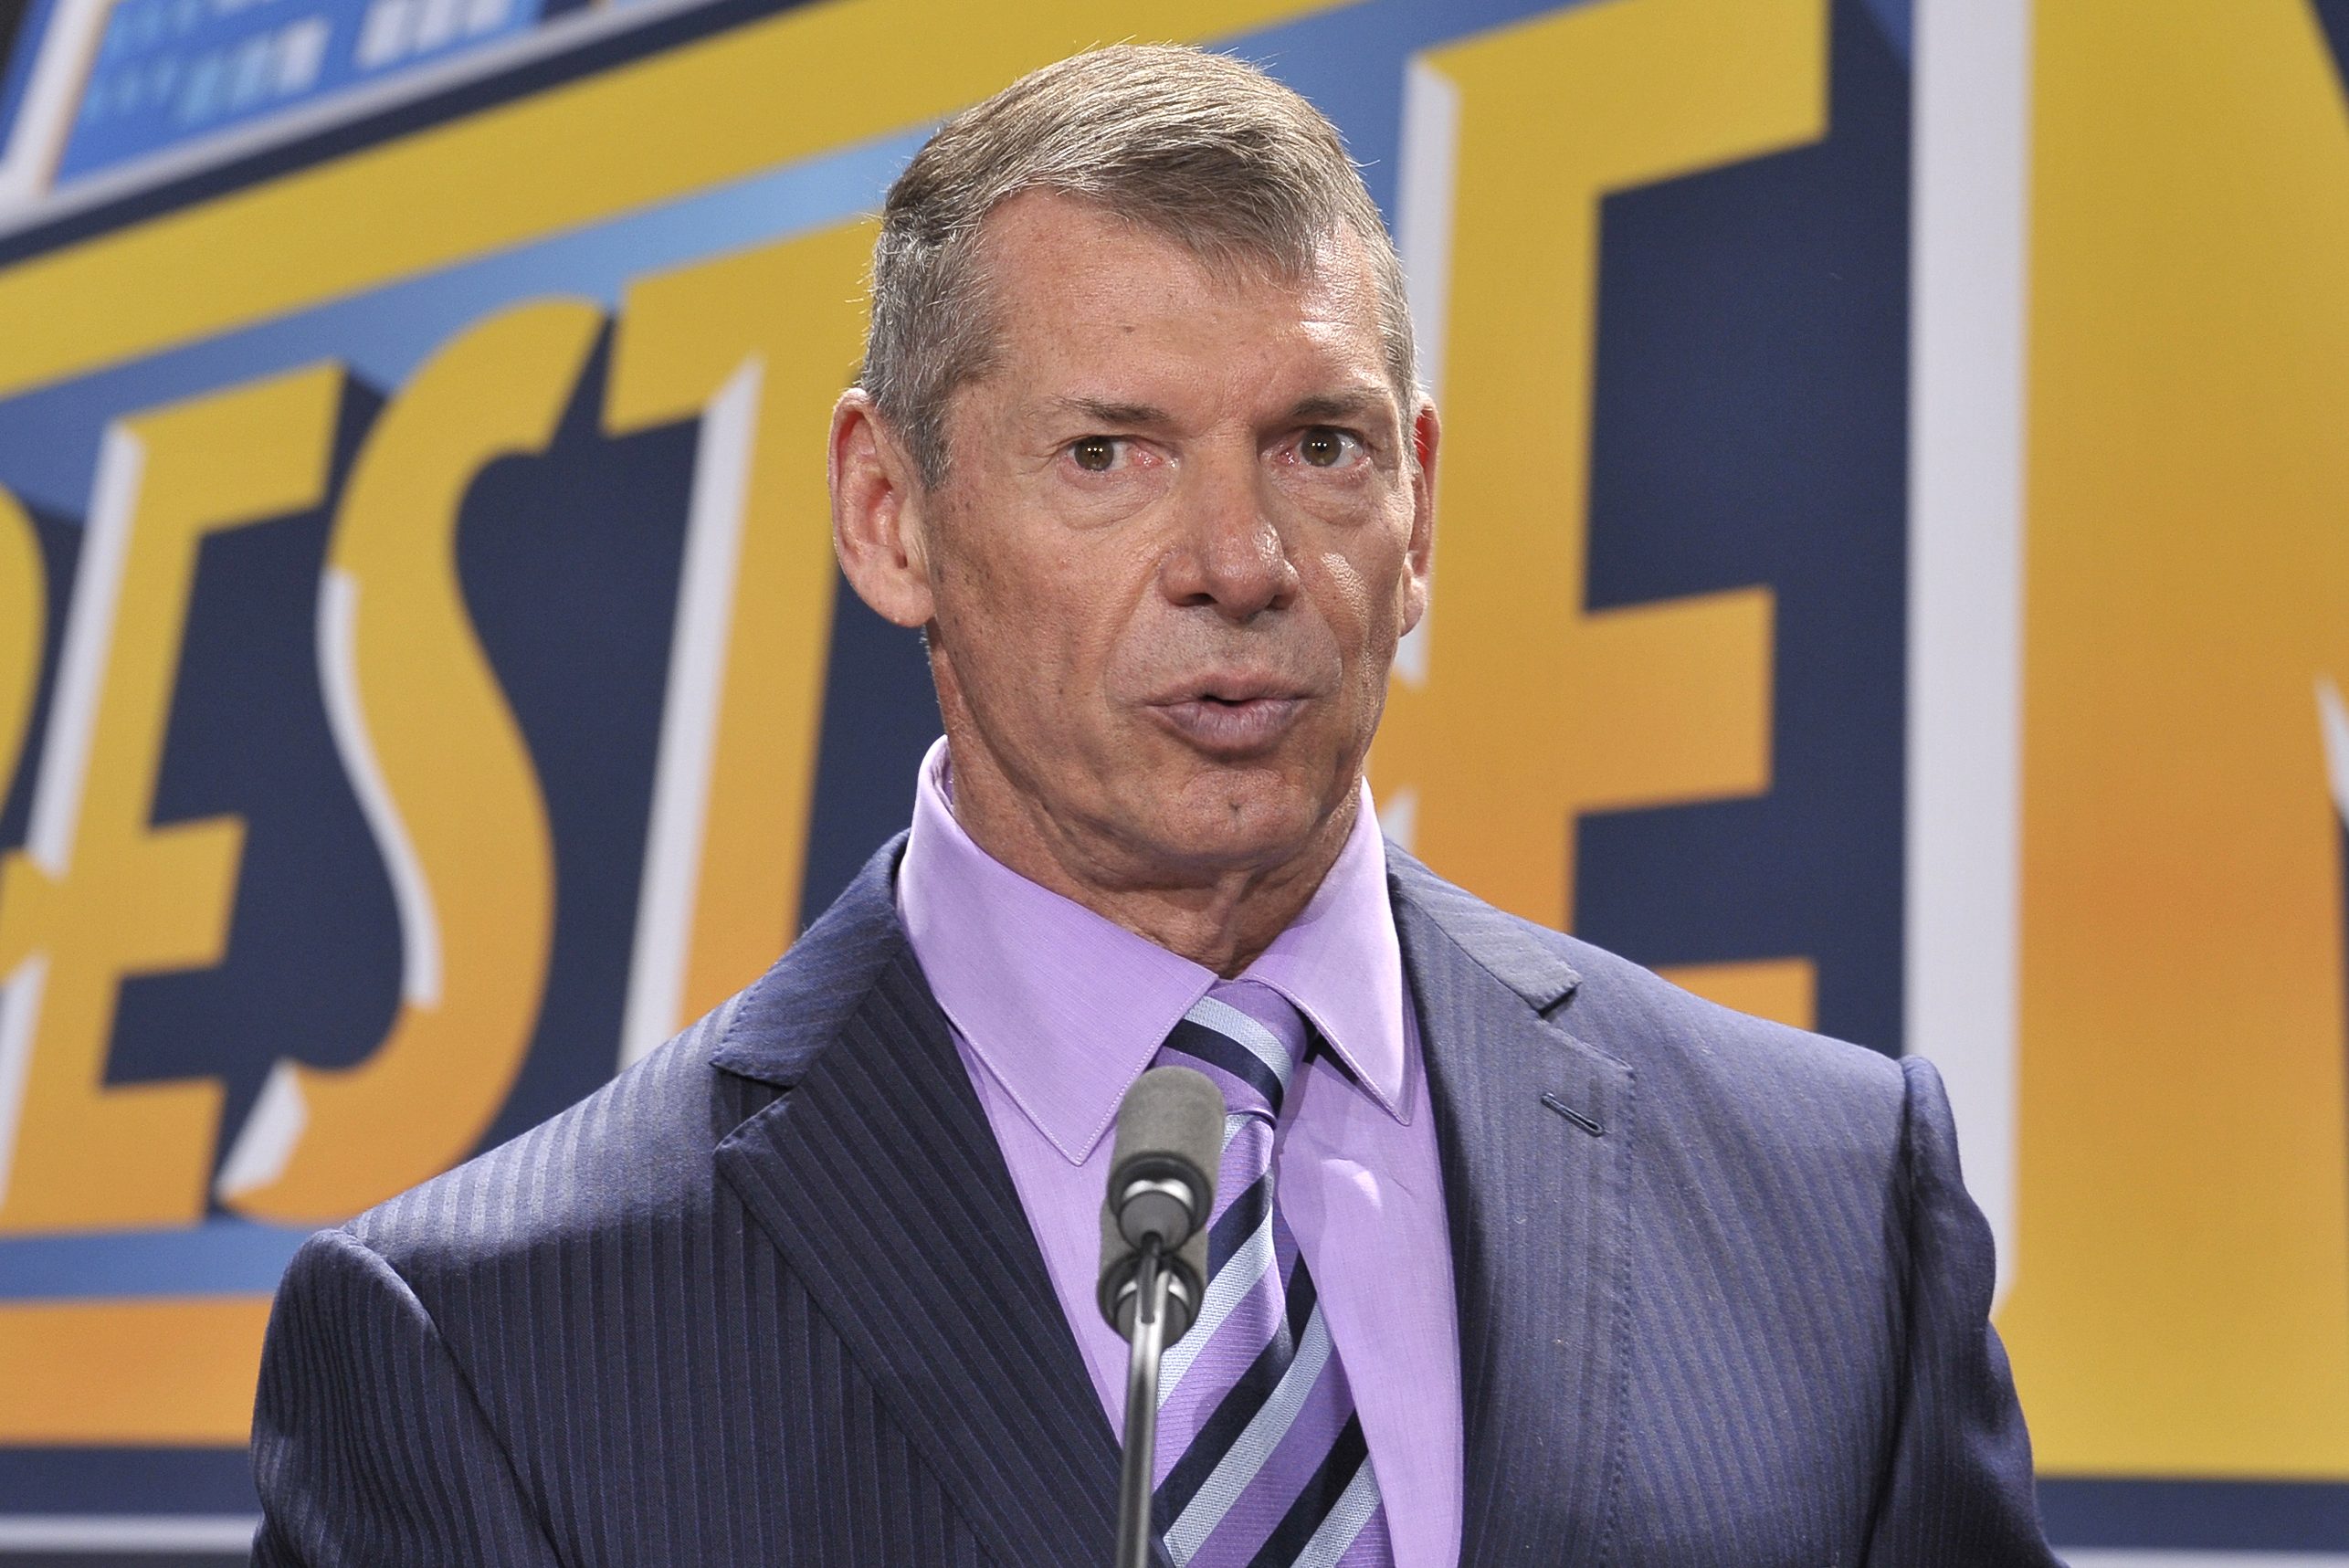 WWE CEO Vince McMahon in a suit with a purple shirt and striped tie